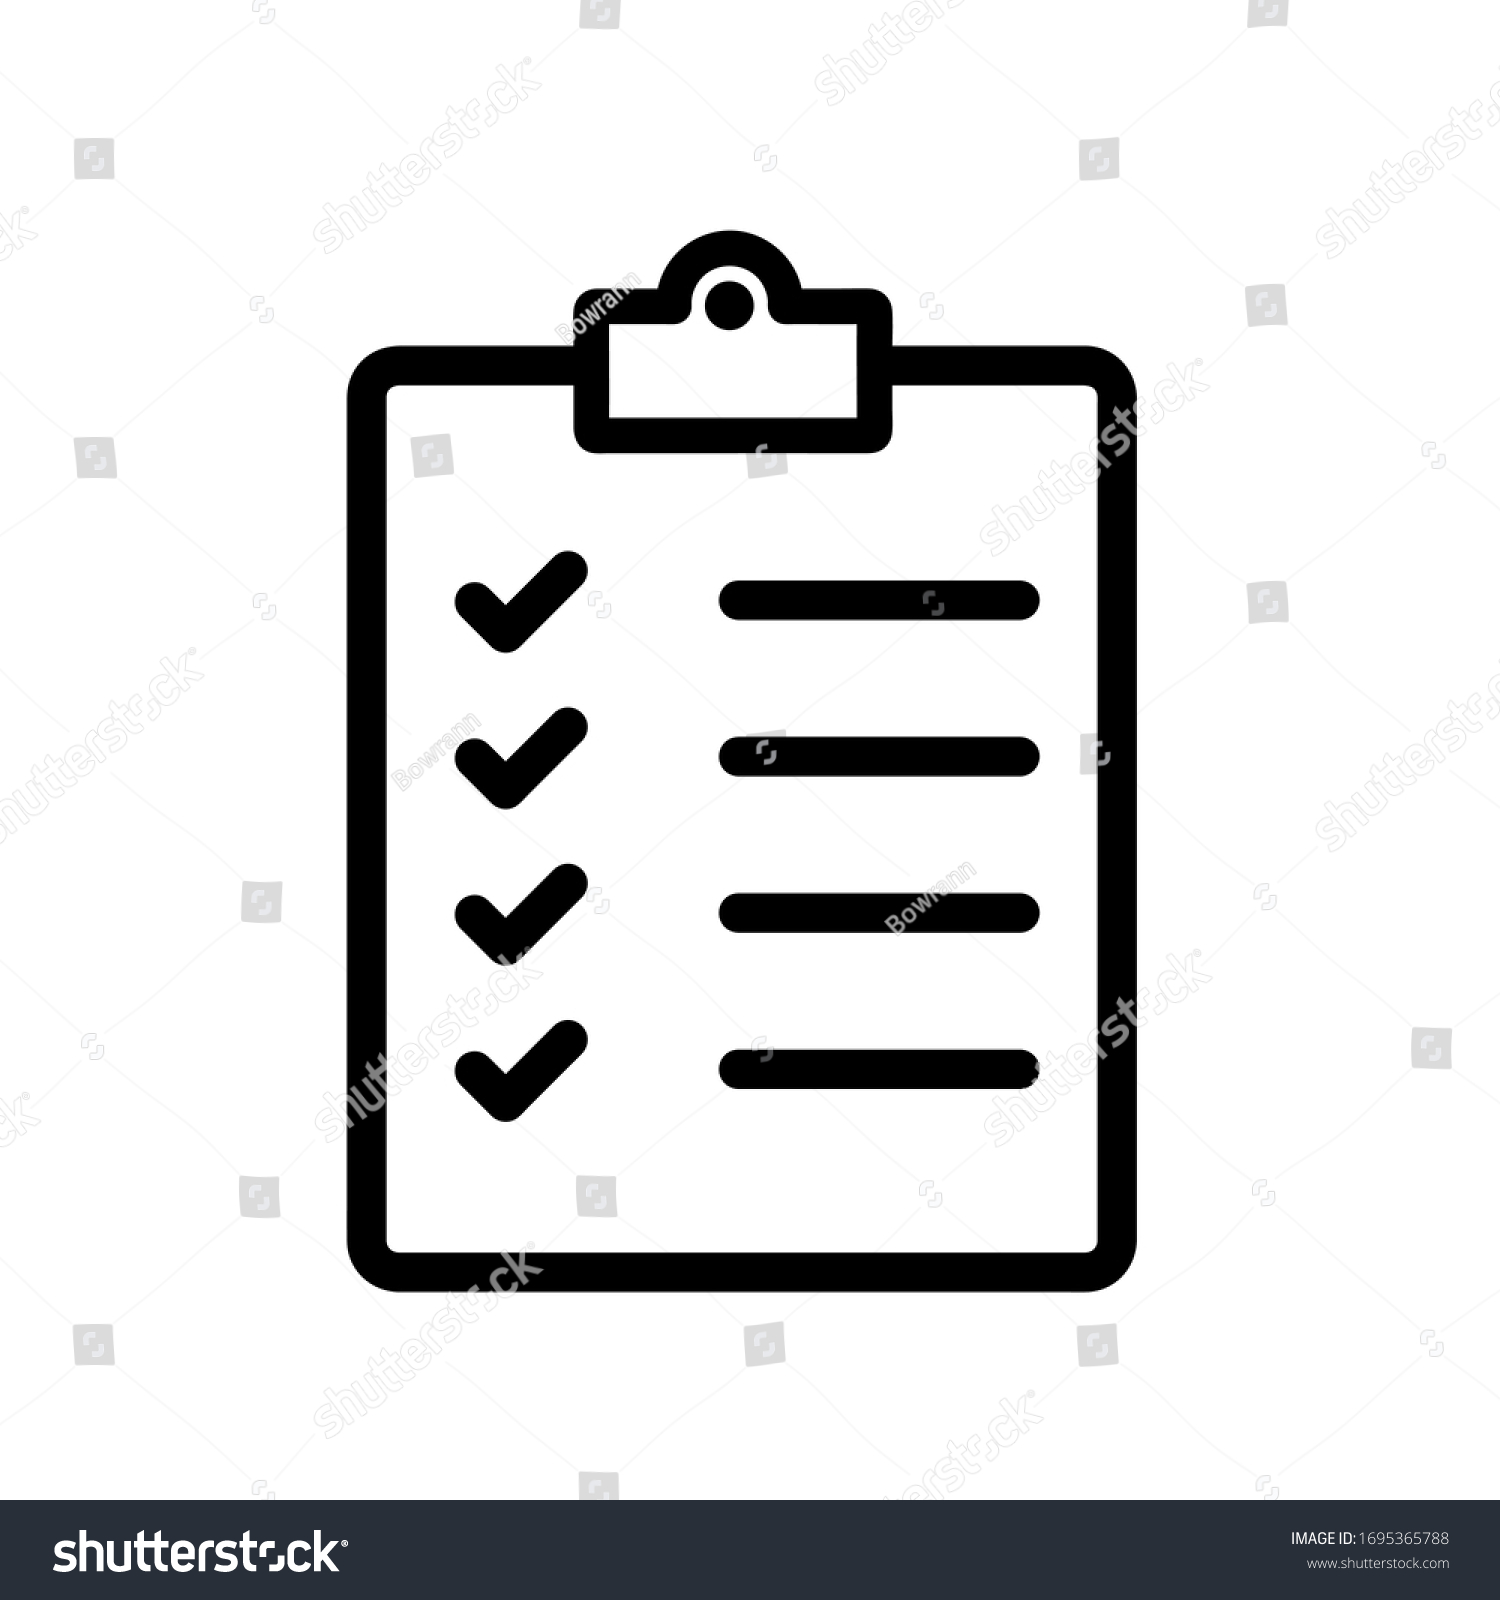 Check list icon,vector illustration. Flat design style. vector check list icon illustration isolated on White background, check list icon Eps10. check list icons graphic design vector symbols. #1695365788